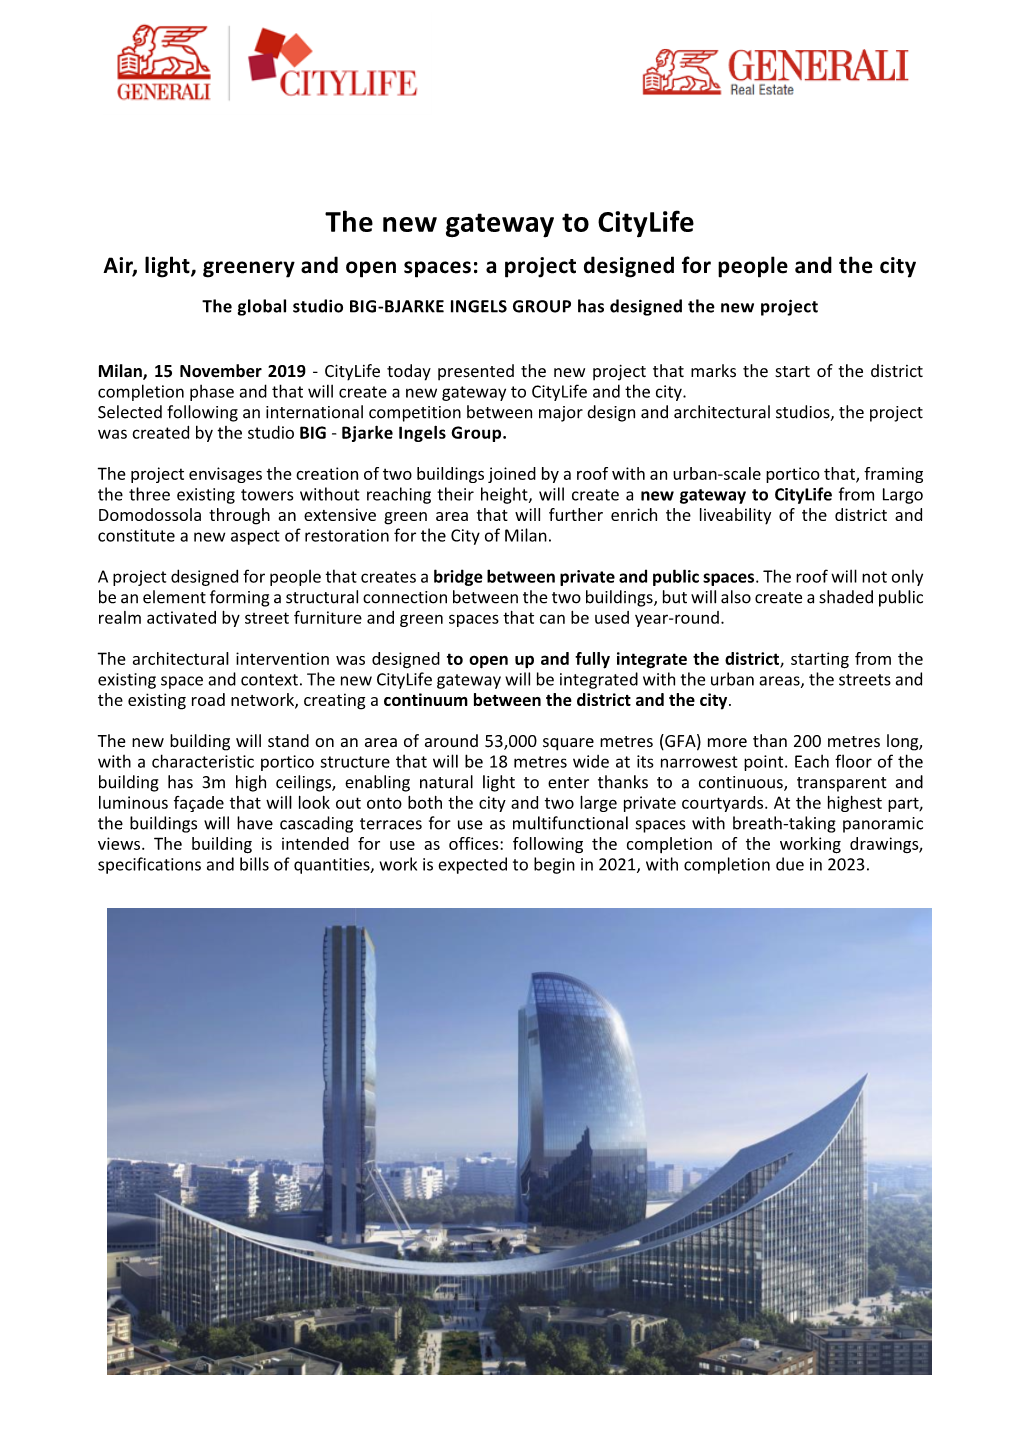 Generali Real Estate and Citylife Presented the New Project